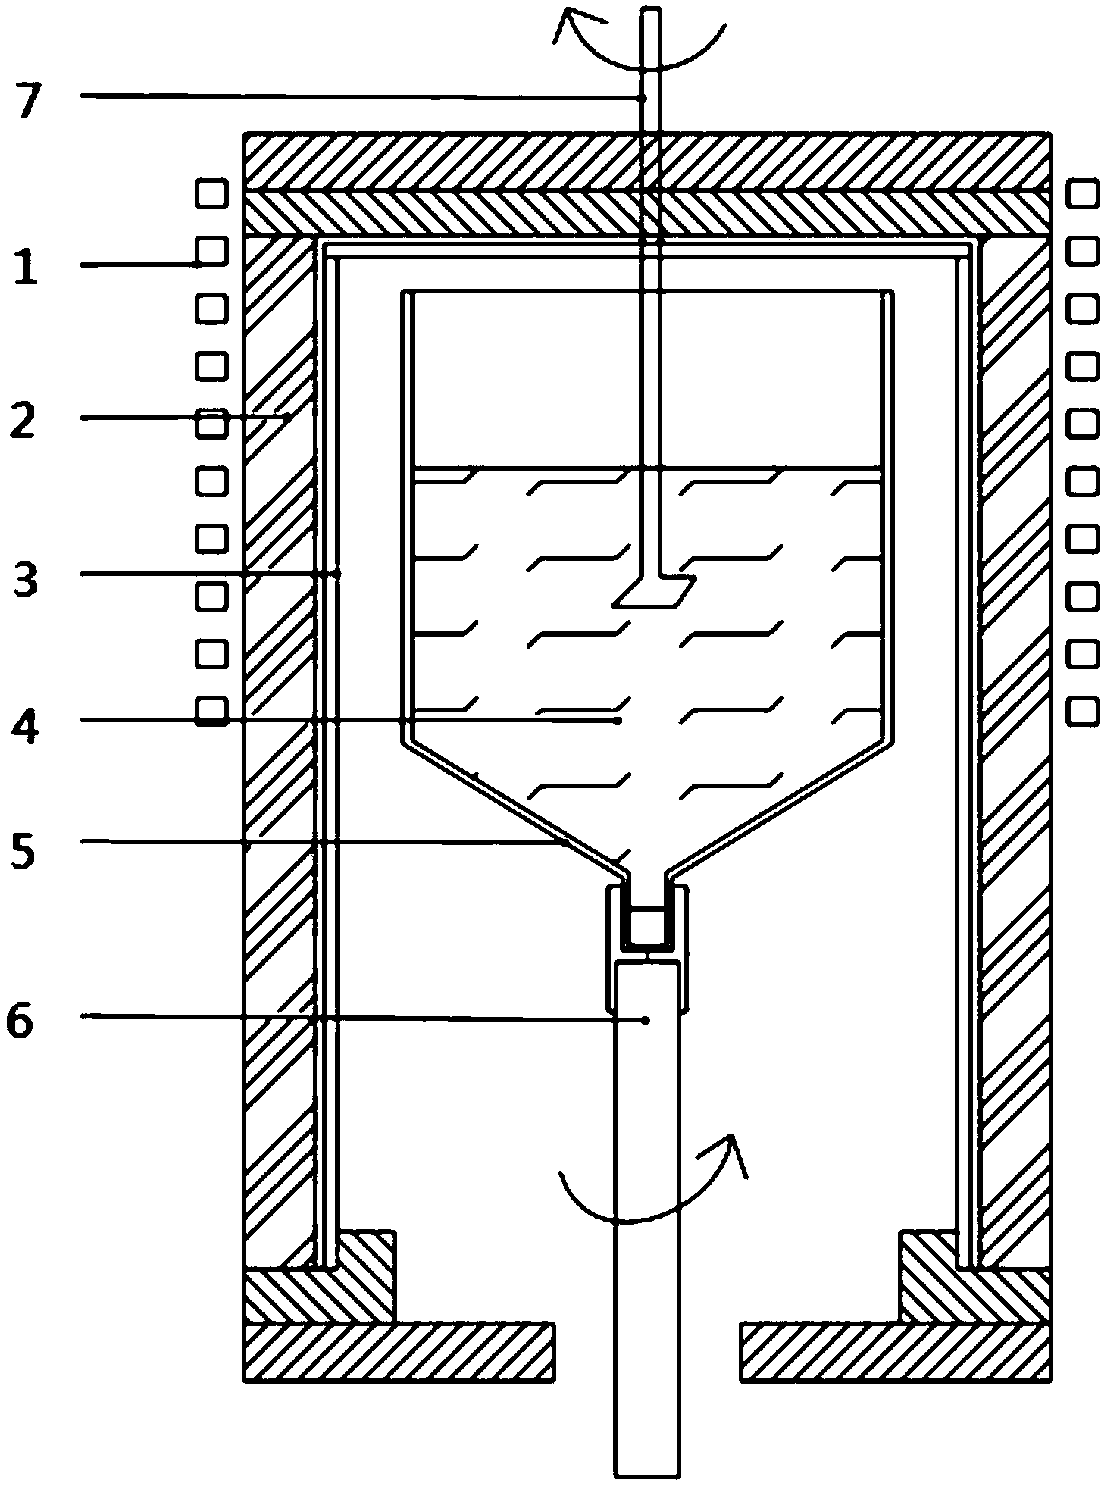 Crystal growth device with melt stirring function